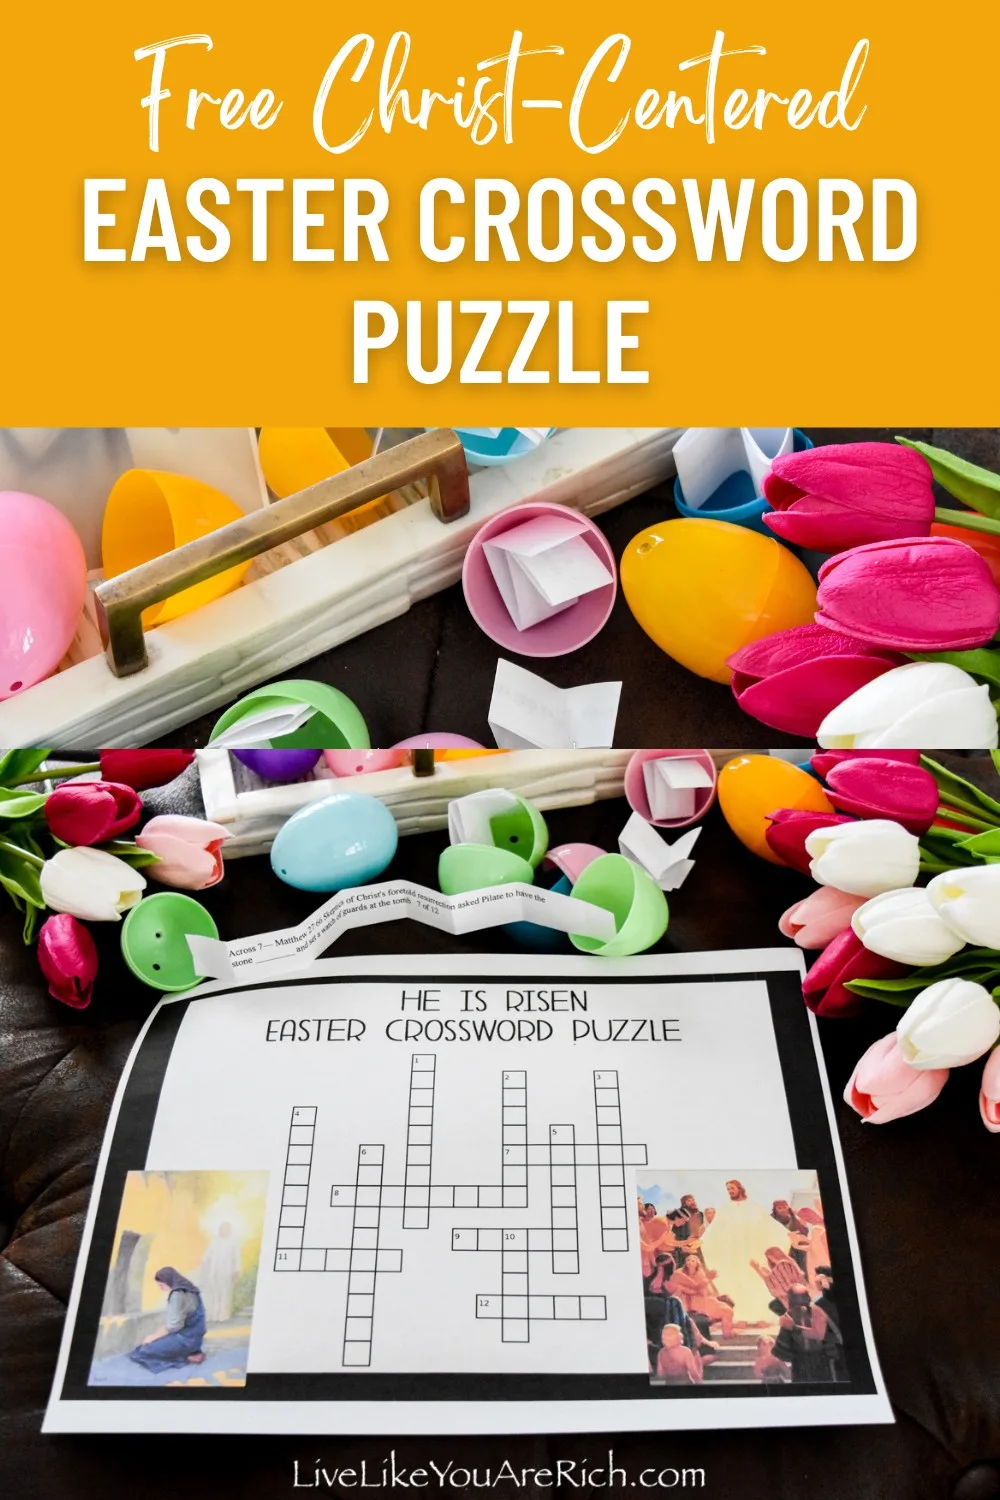 Free Christ-Centered Easter Crossword Puzzle—with an optional egg hunt